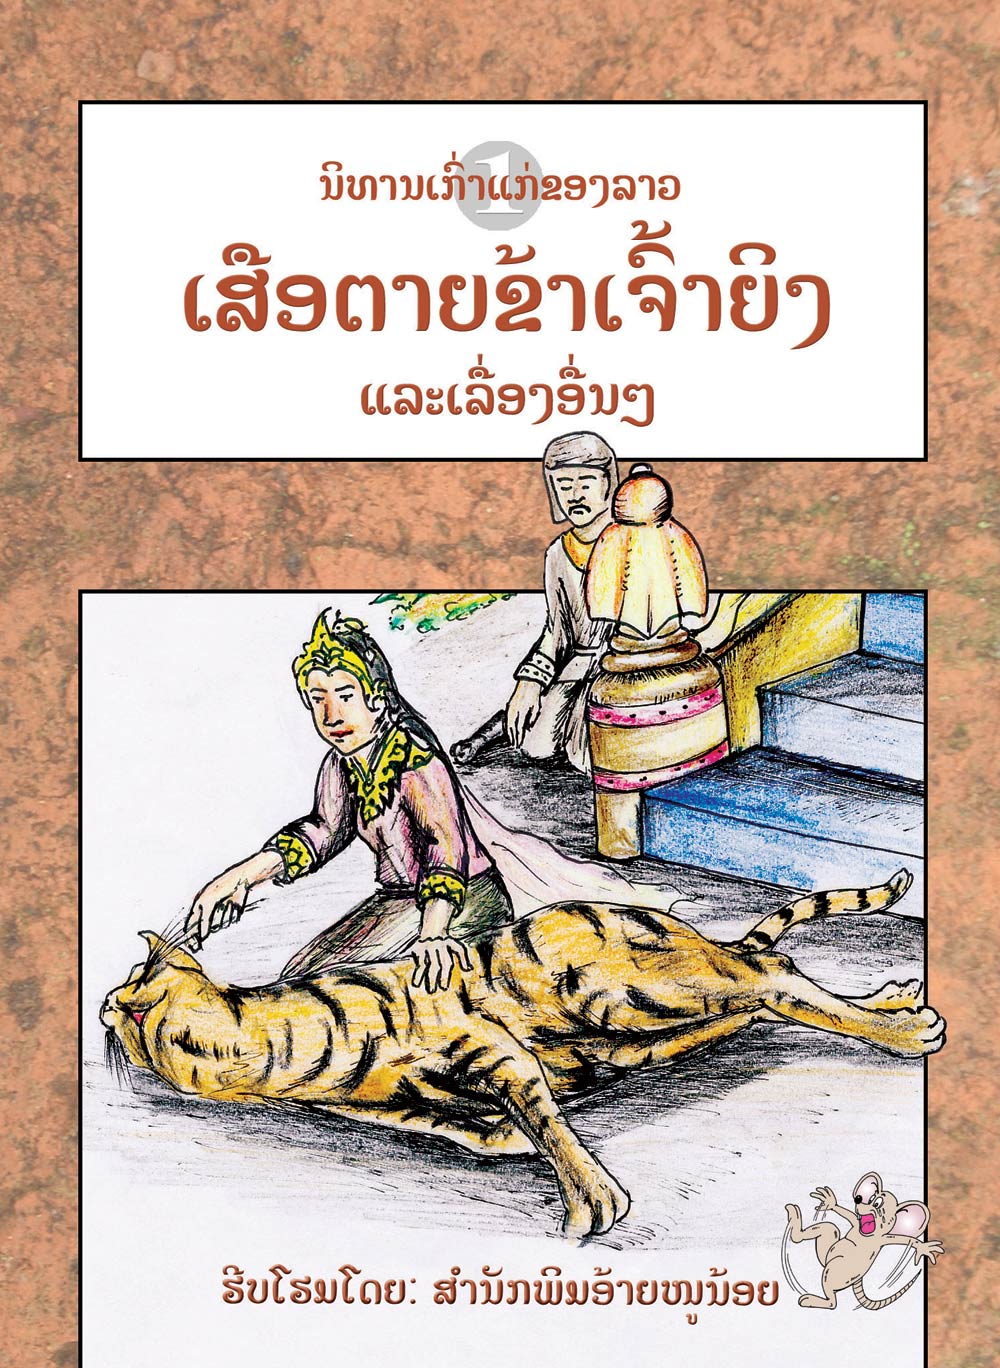 The Dead Tiger Who Killed a Princess large book cover, published in Lao language